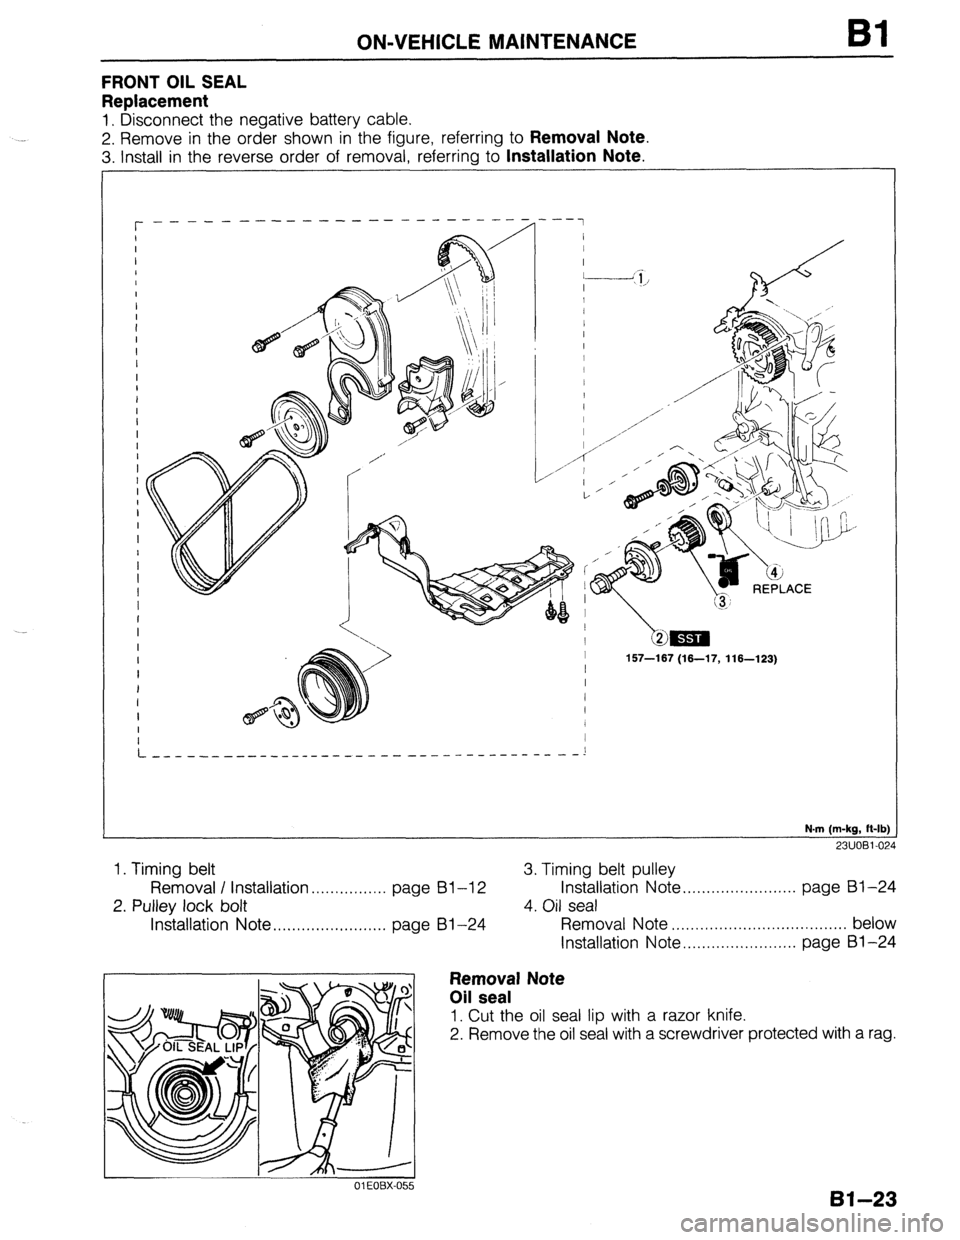 MAZDA 323 1989  Factory Repair Manual ON-VEHICLE MAINTENANCE 
FRONT OIL SEAL 
Replacement 
1. Disconnect the negative battery cable. 
2. Remove in the order shown in the figure, referring to 
Removal Note. 
3. Install in the reverse order